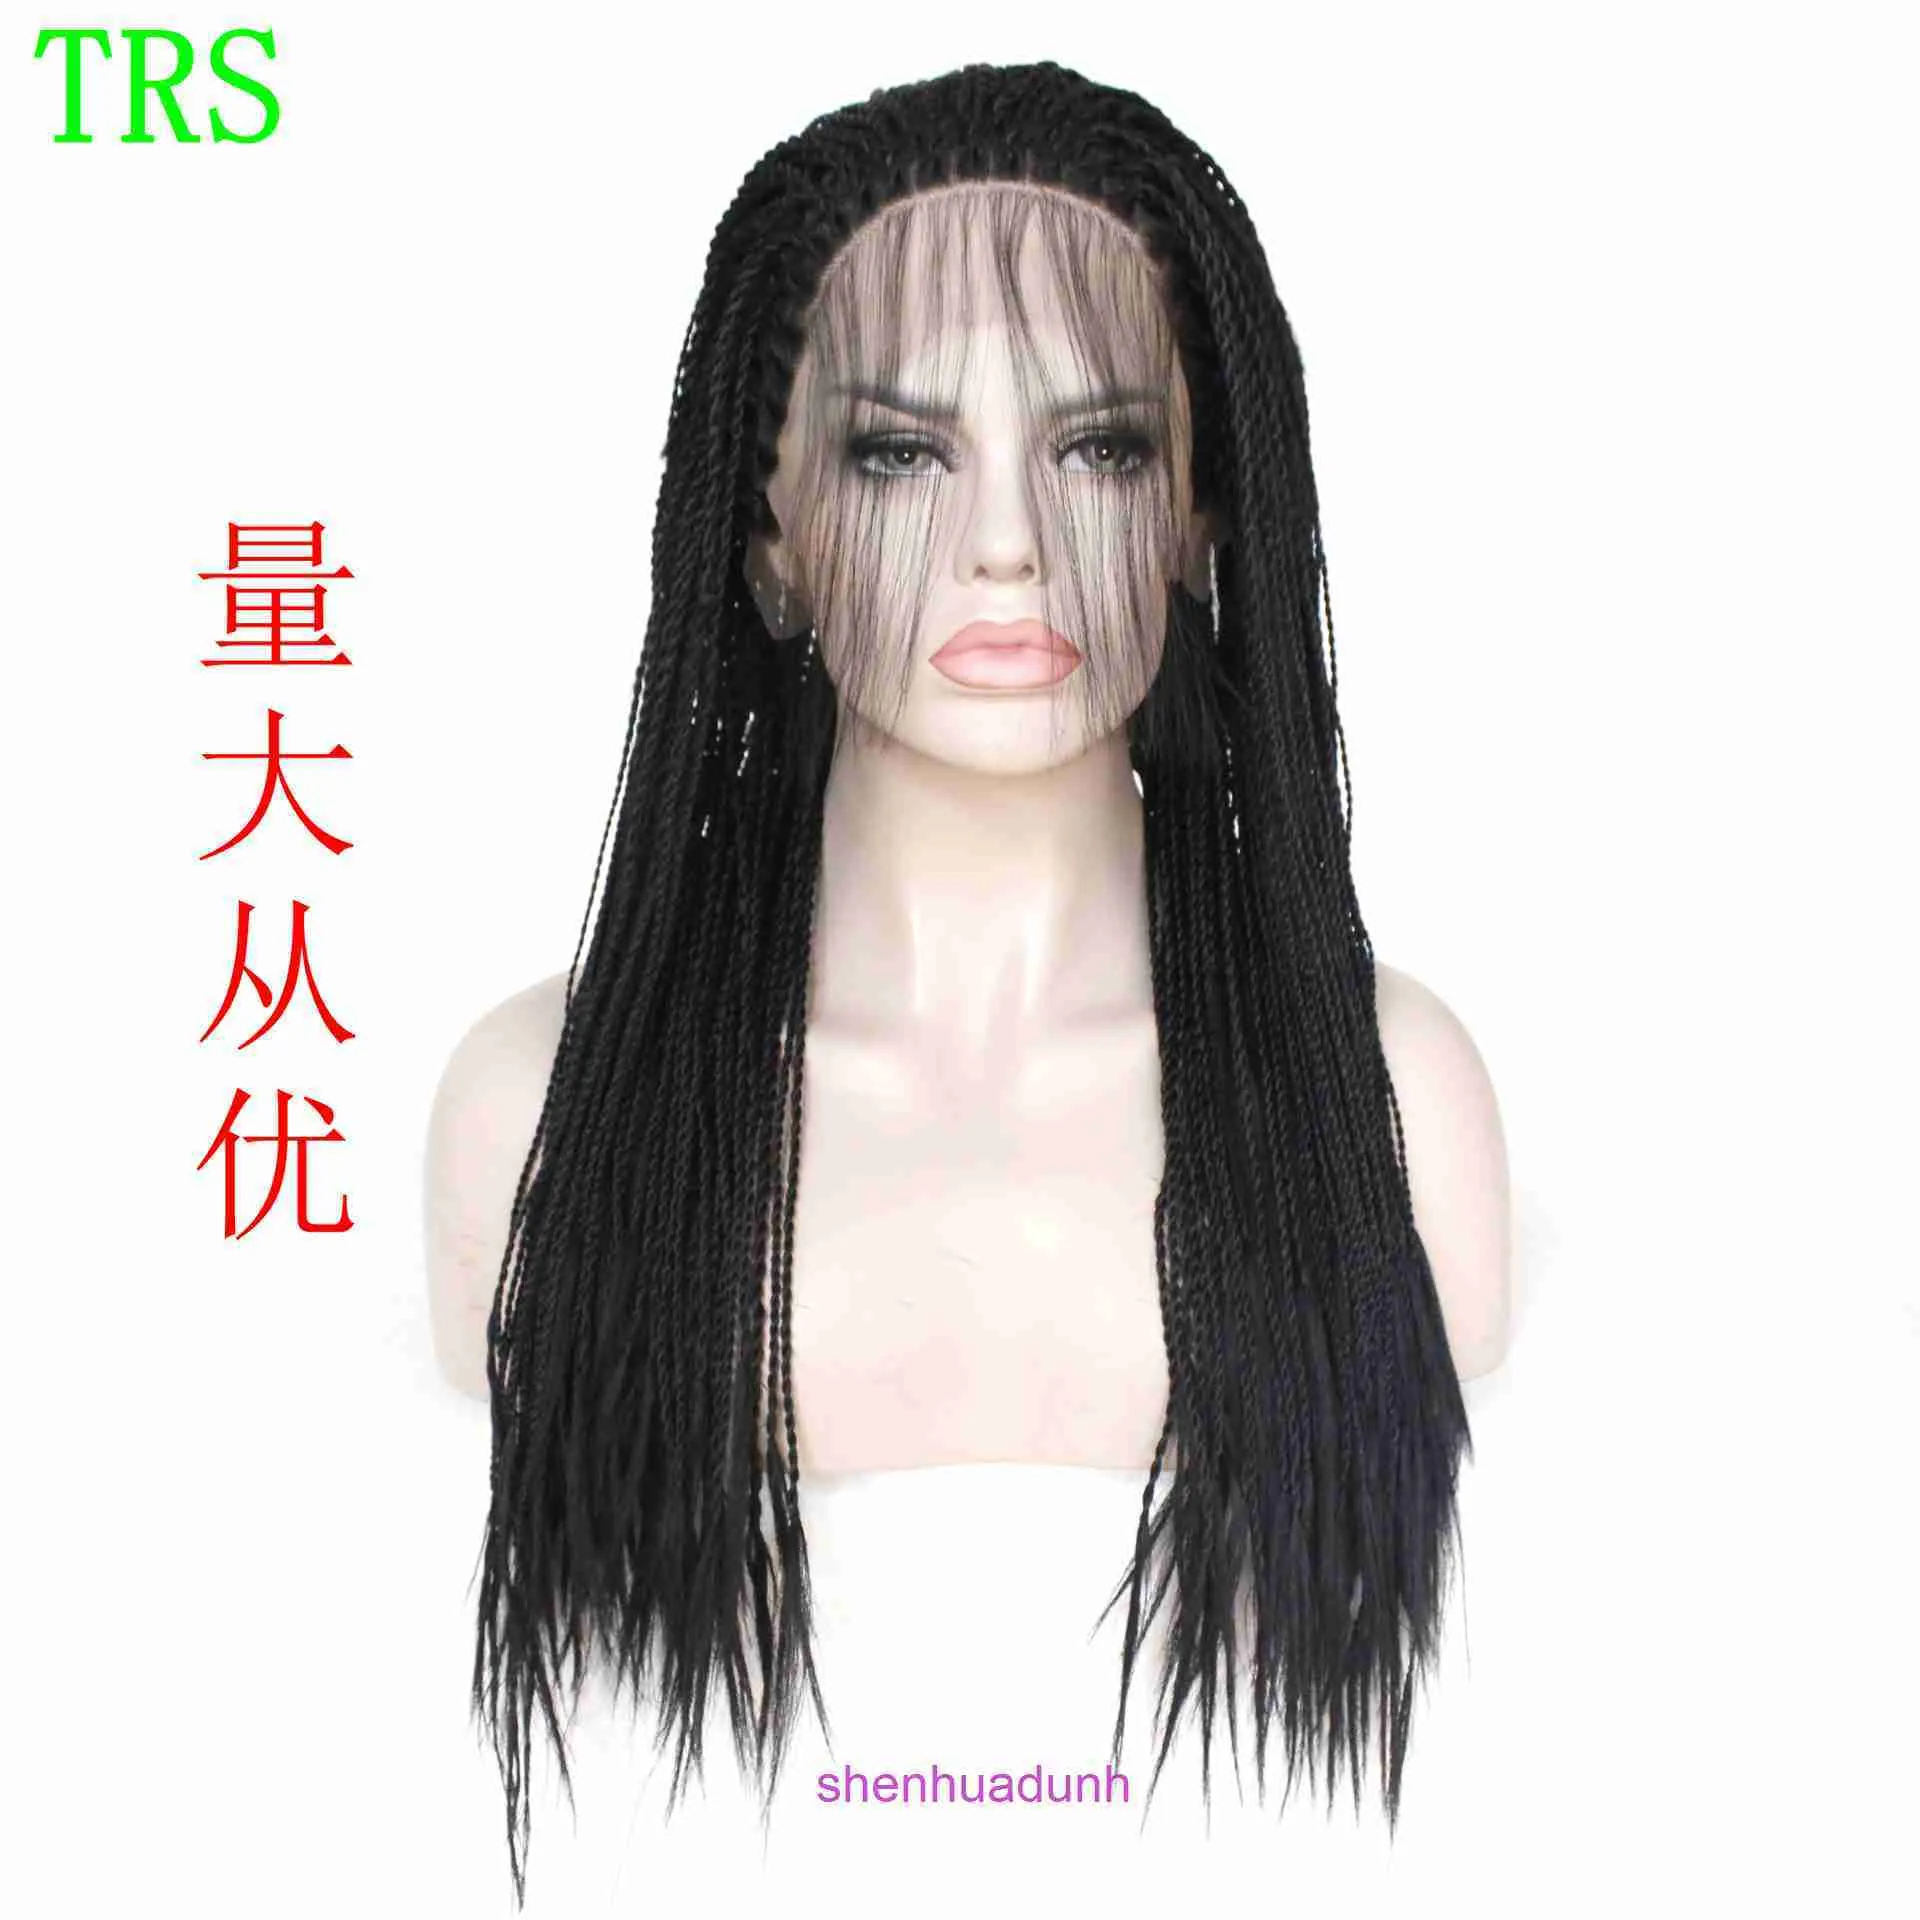 Fashionable black haired baby hair with small dirty braids wig half hand hooked synthetic fiber front lace headband two twisted braid wigs